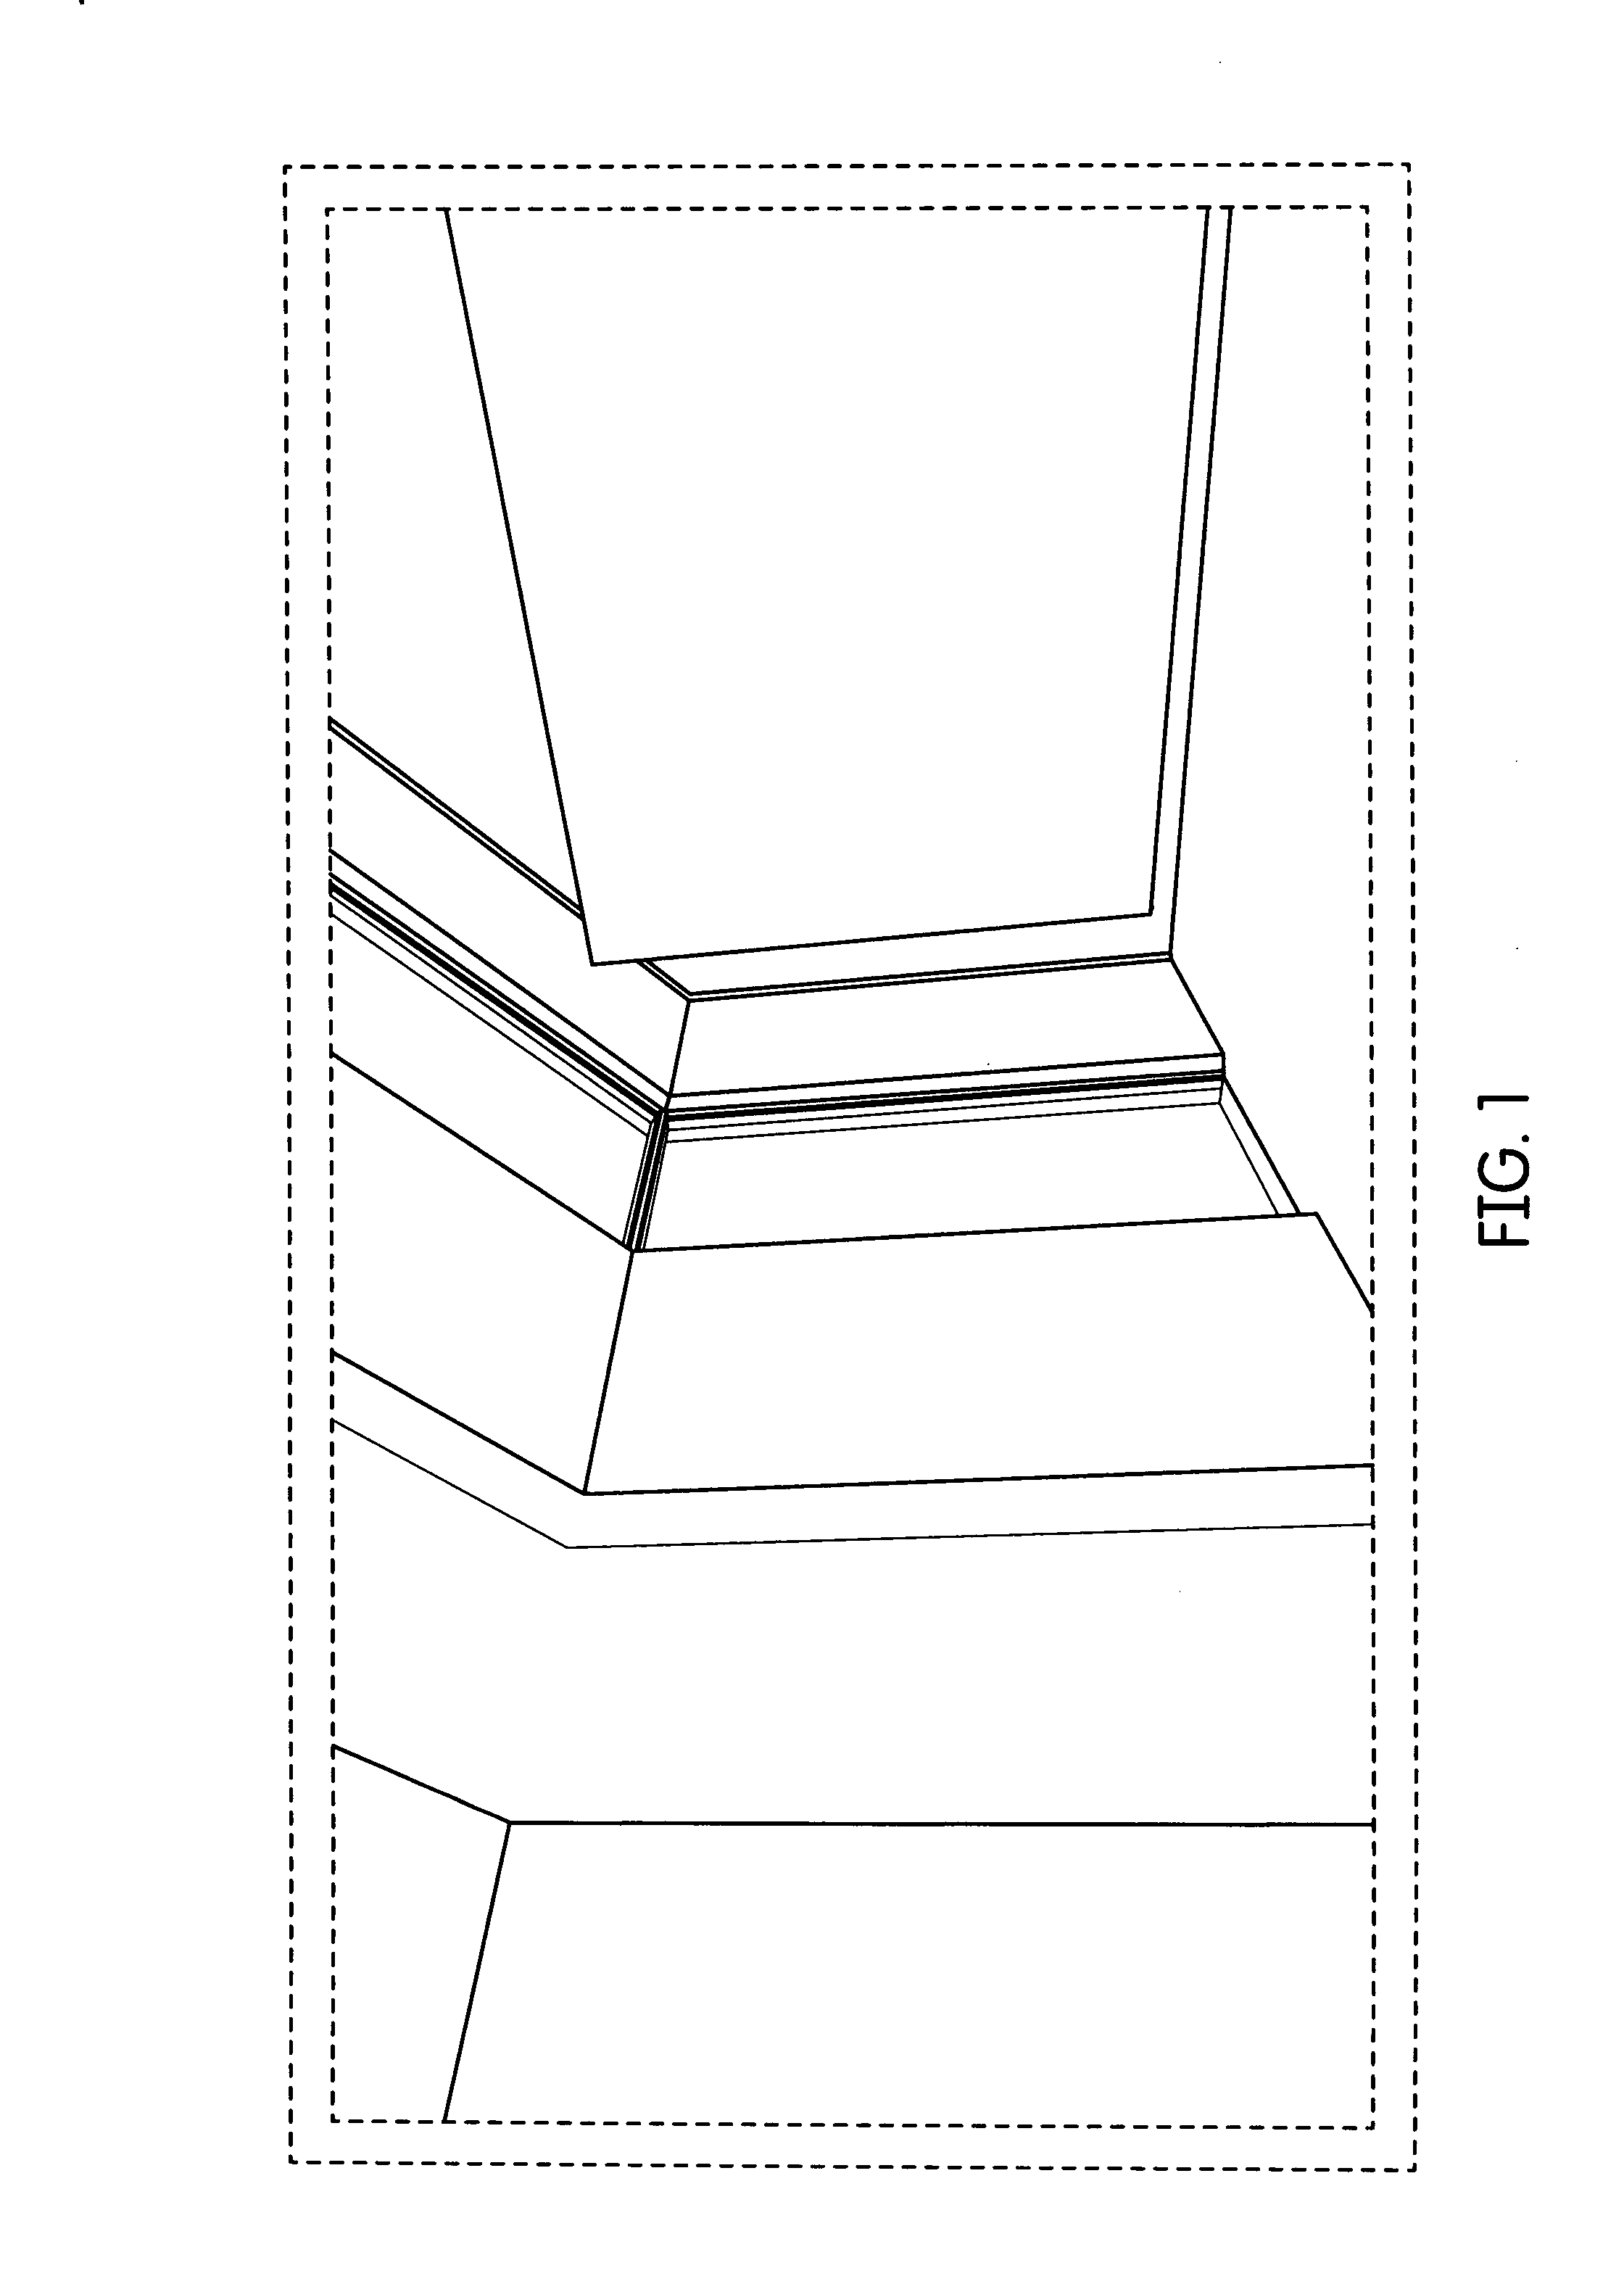 175720 DISPLAY SCREEN WITH AN ANIMATED GRAPHICAL USER INTERFACE